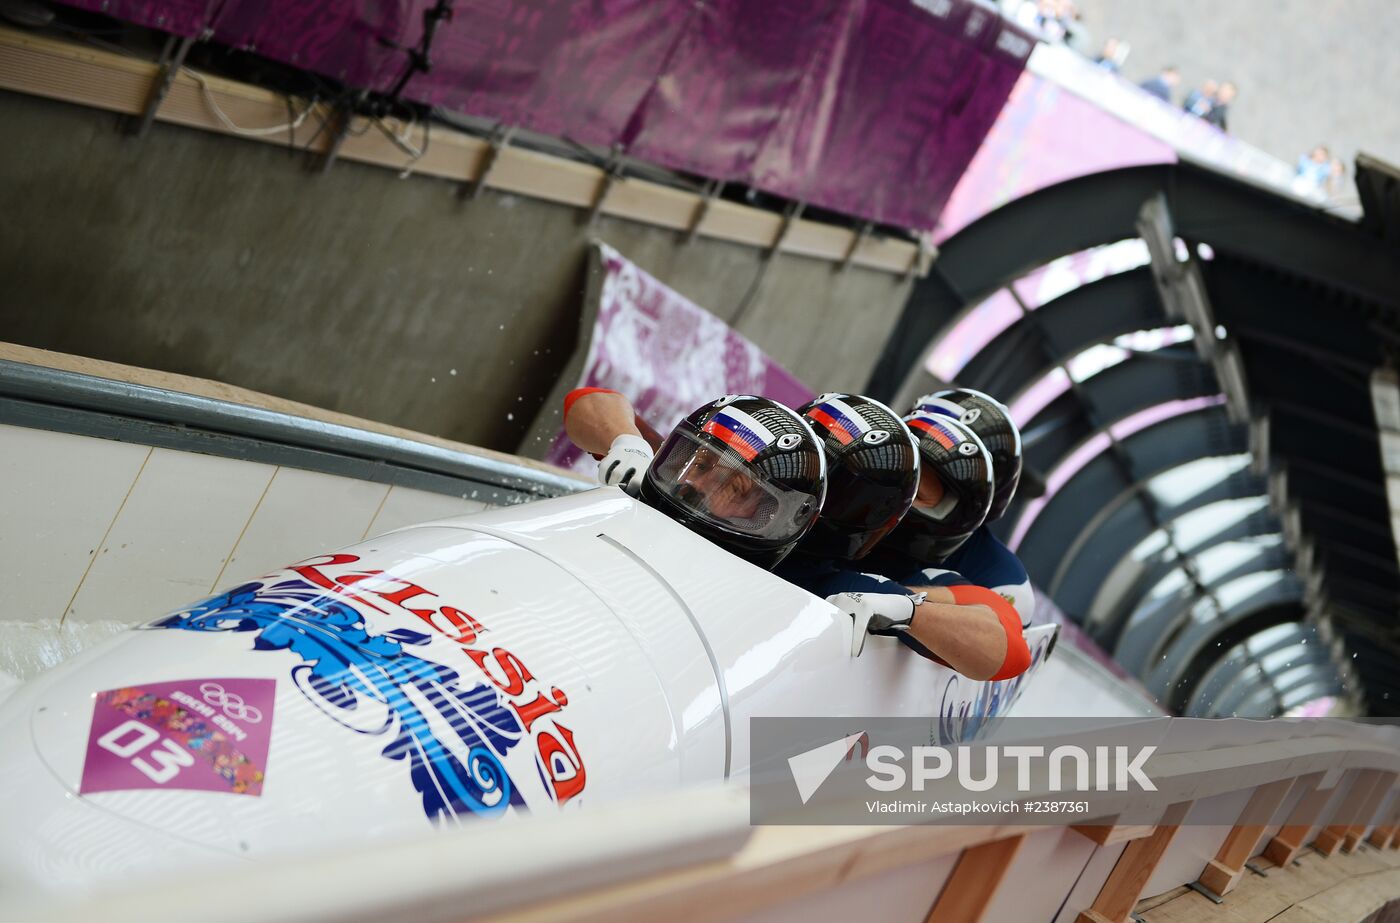 2014 Winter Olympics. Bobsleigh. Four man. Day Two